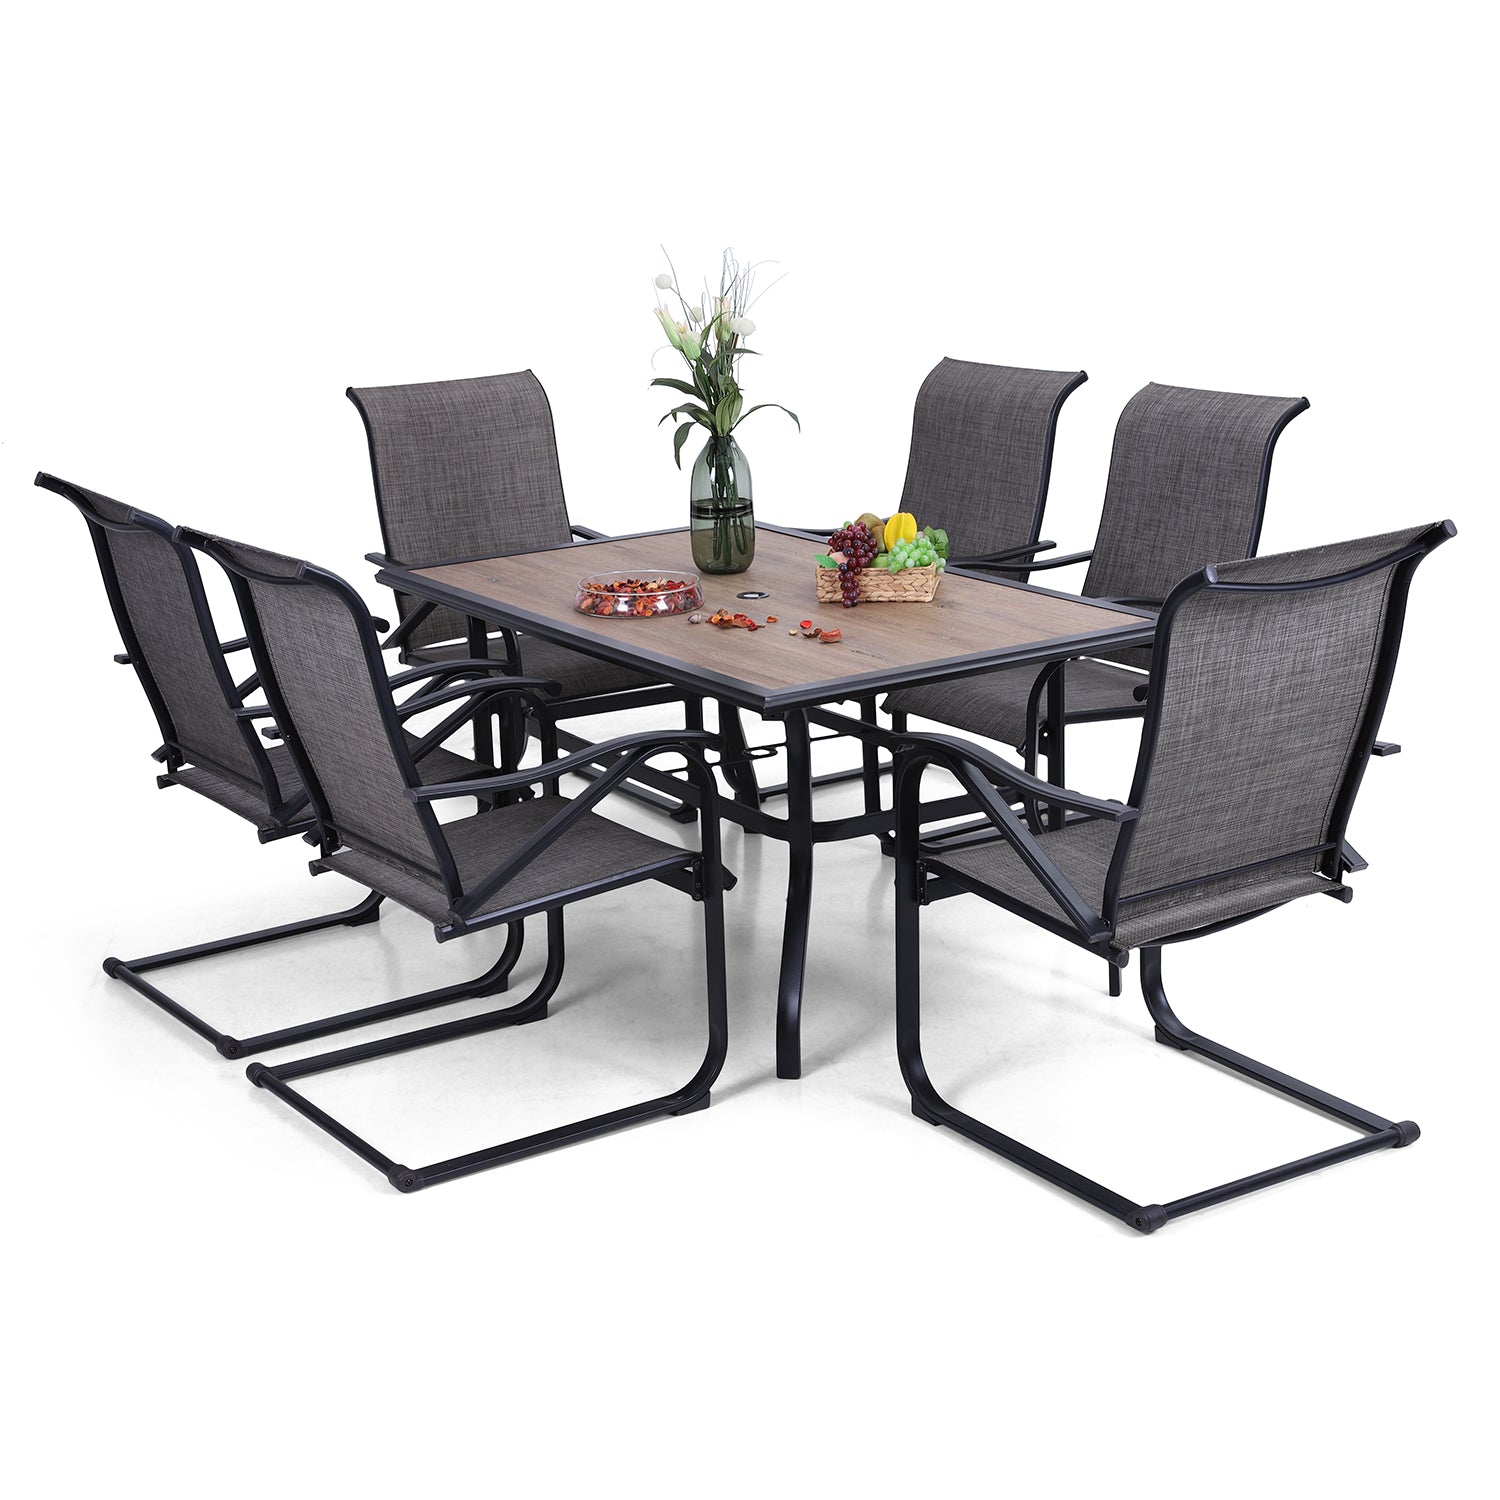 MFSTUDIO Wood-look Rectangle Table & 6 Textilene C-spring Chairs 7-Piece Outdoor Dining Set